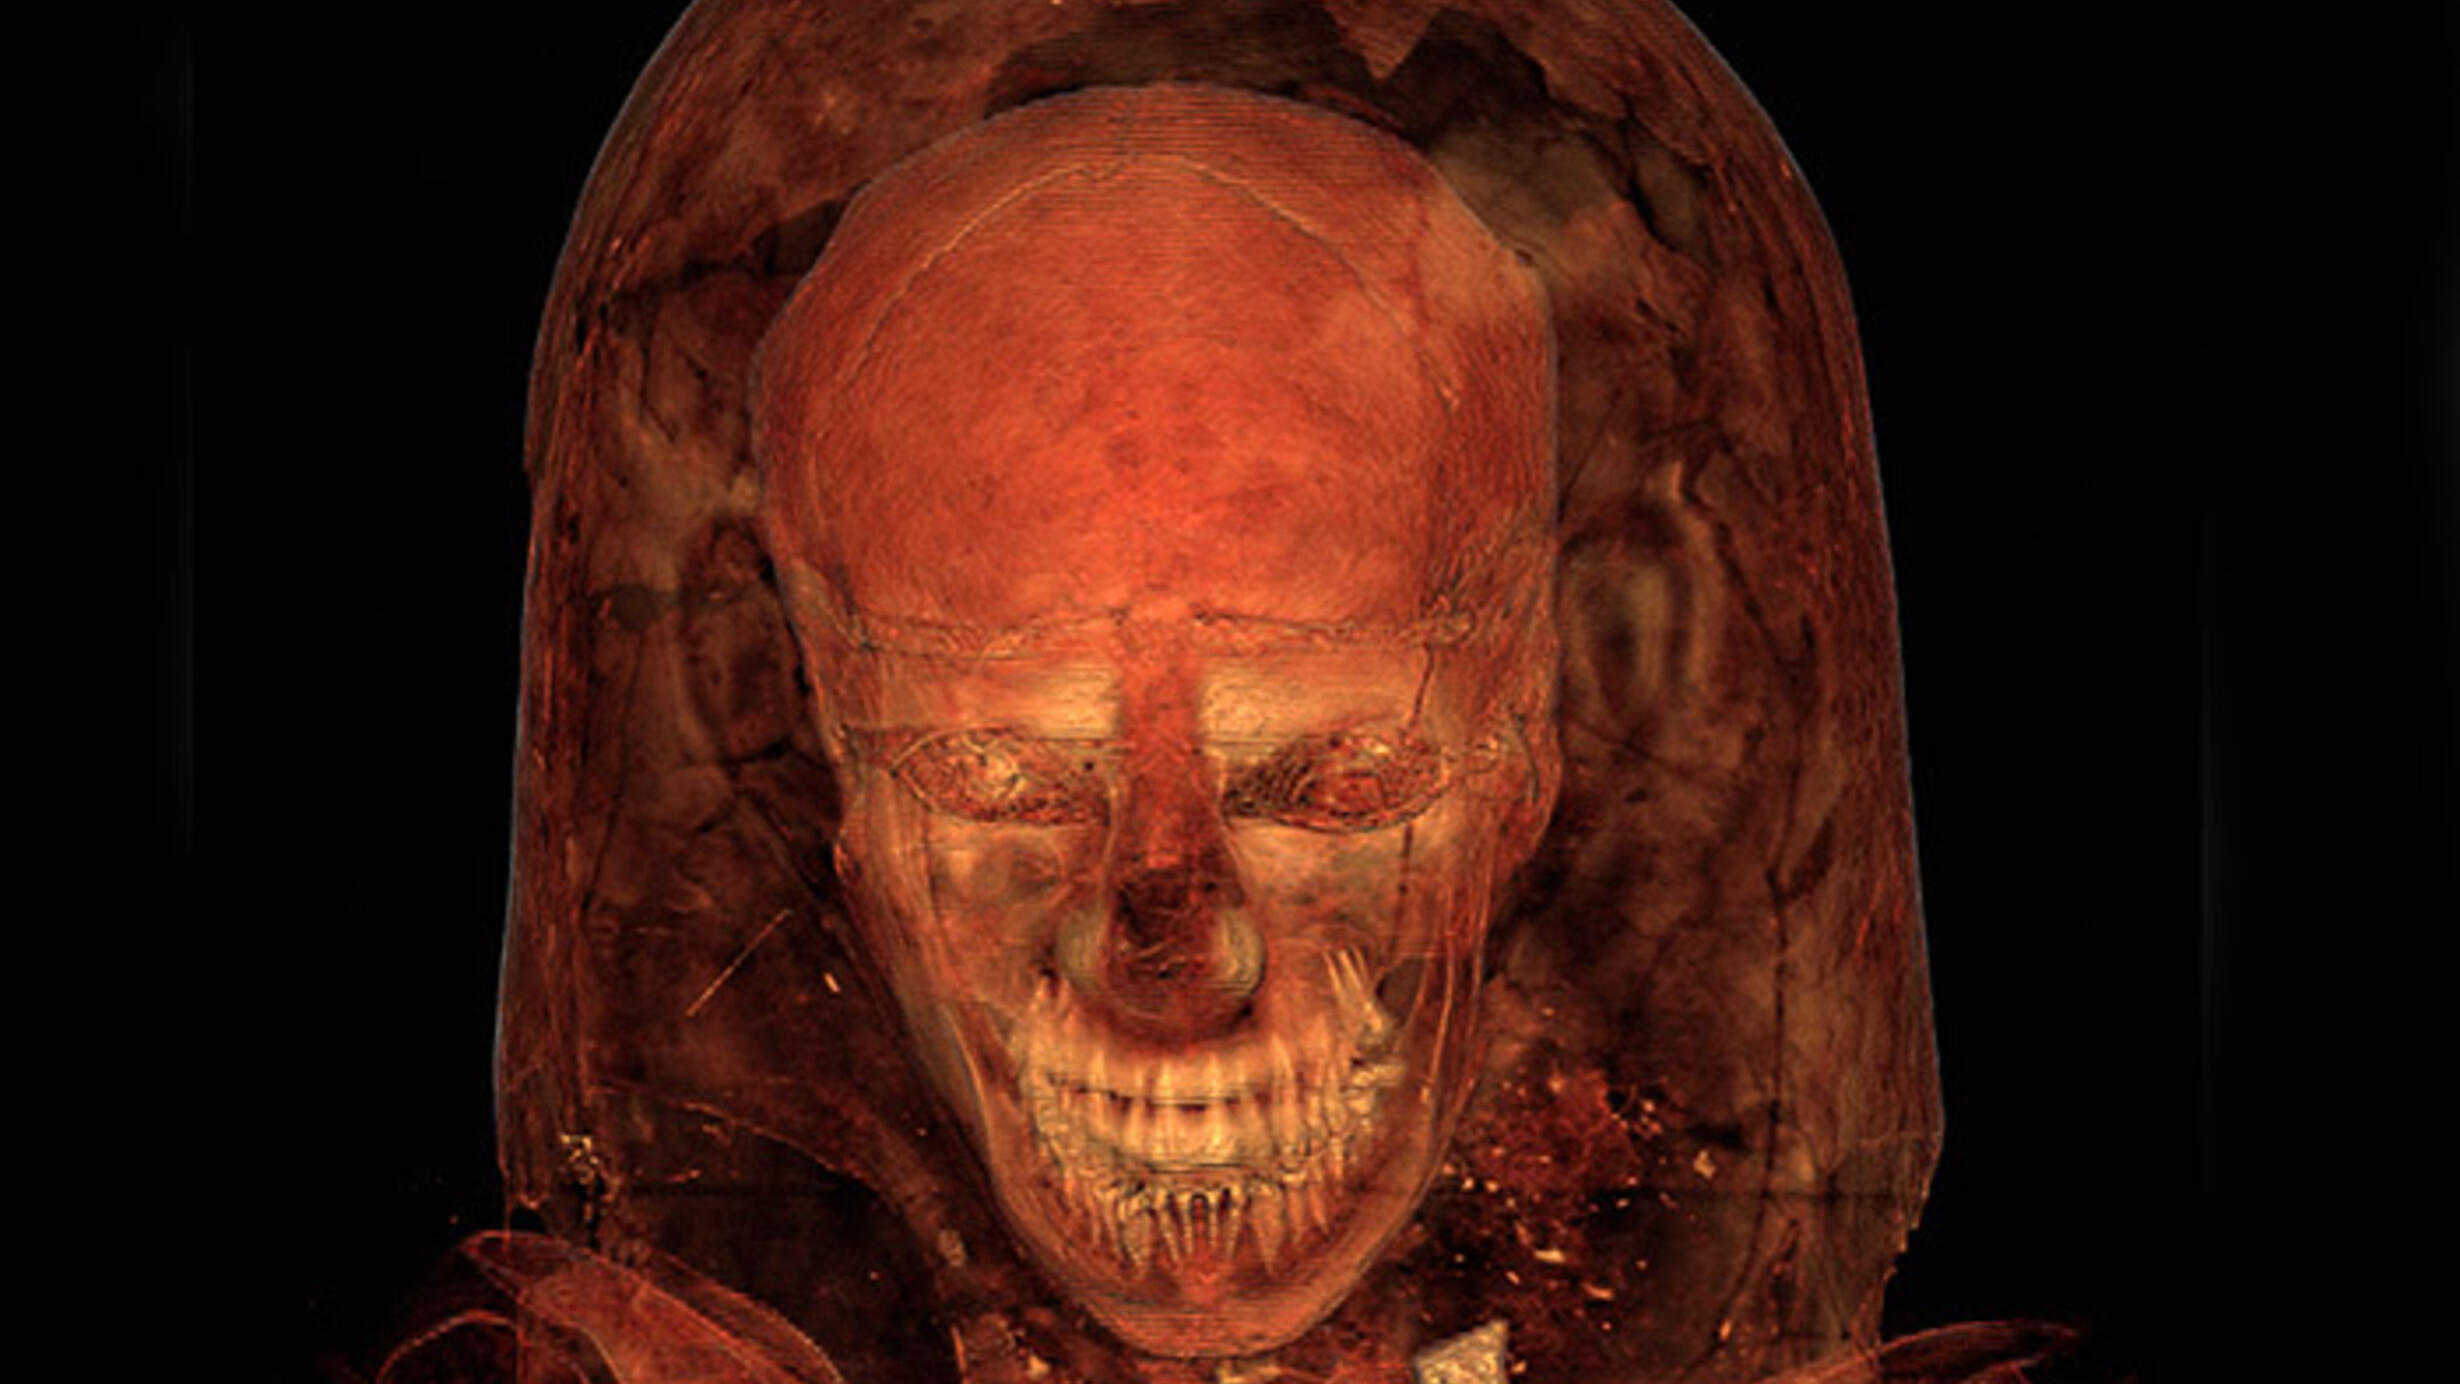 Scan reveals skull and also the outlines of tissue and hair. 